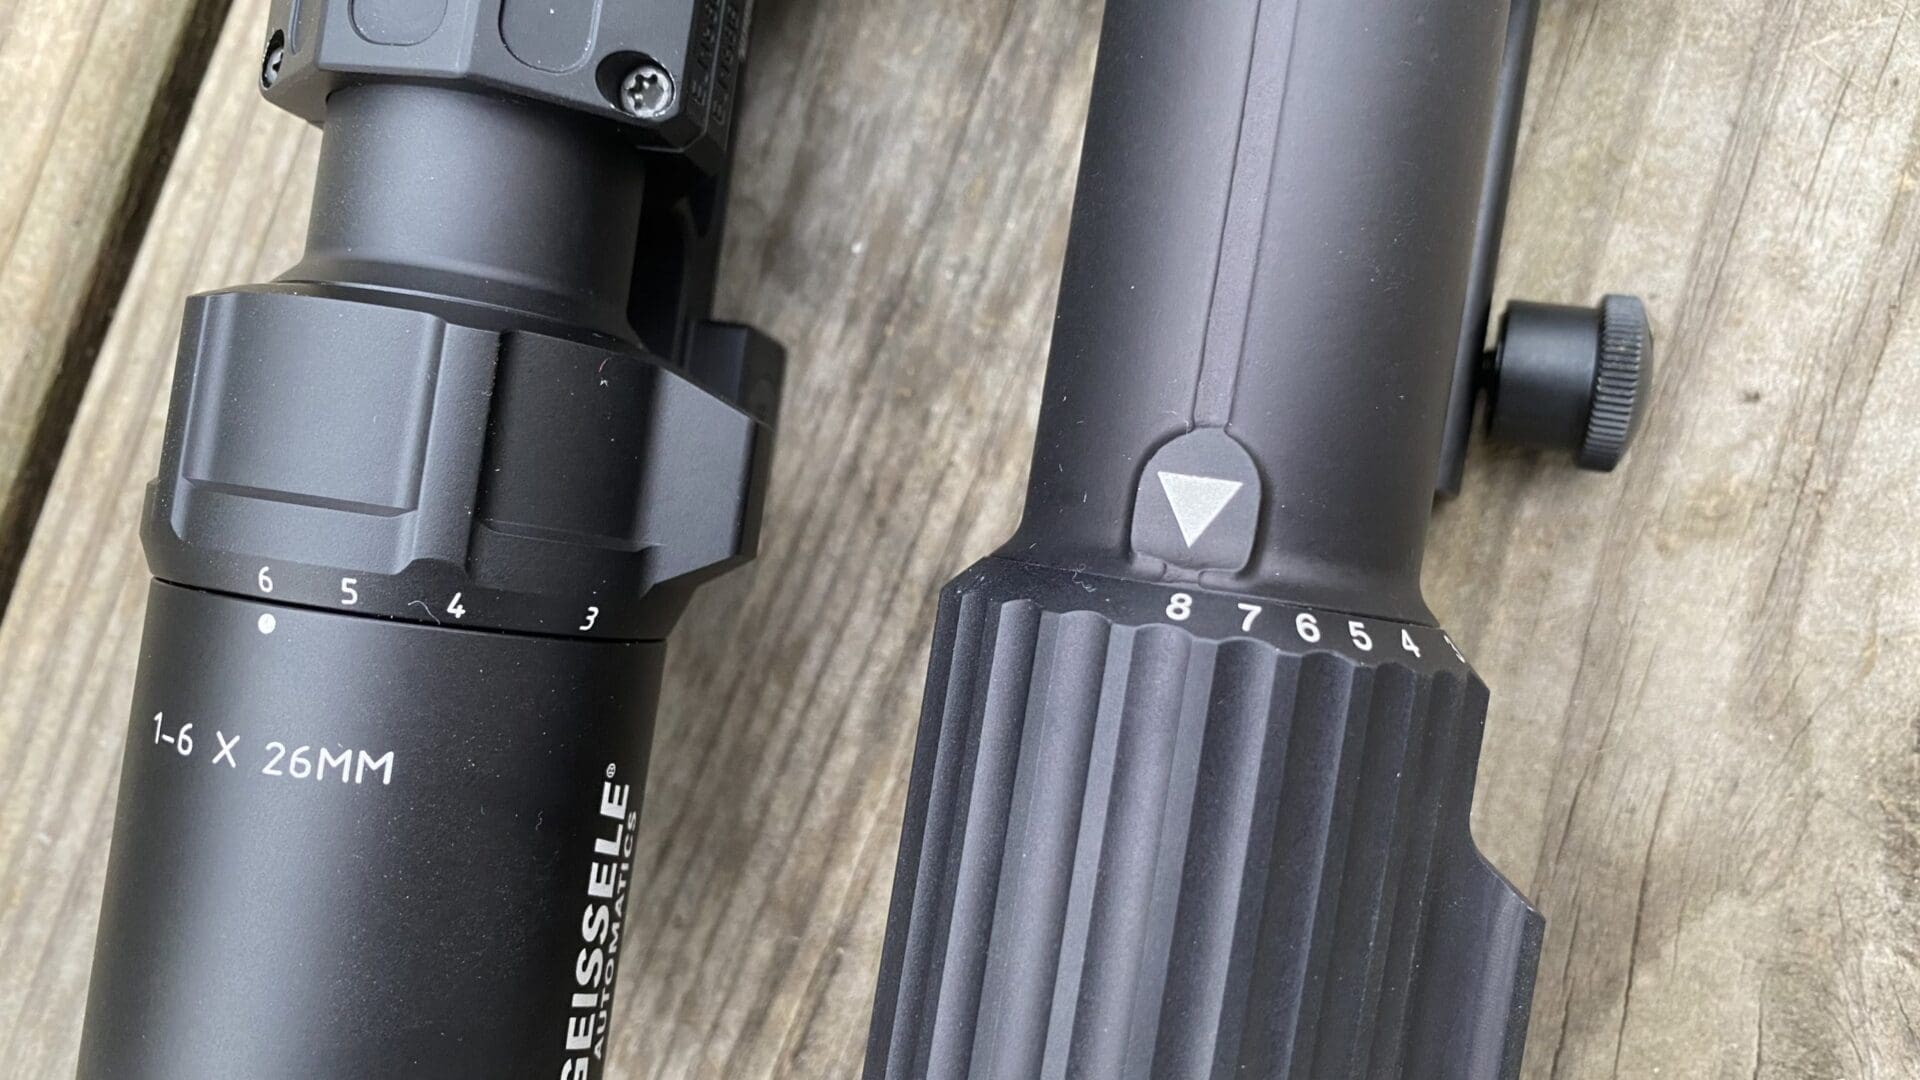 Low Powered Variable Optic: the LPVO is the future of rifle glass